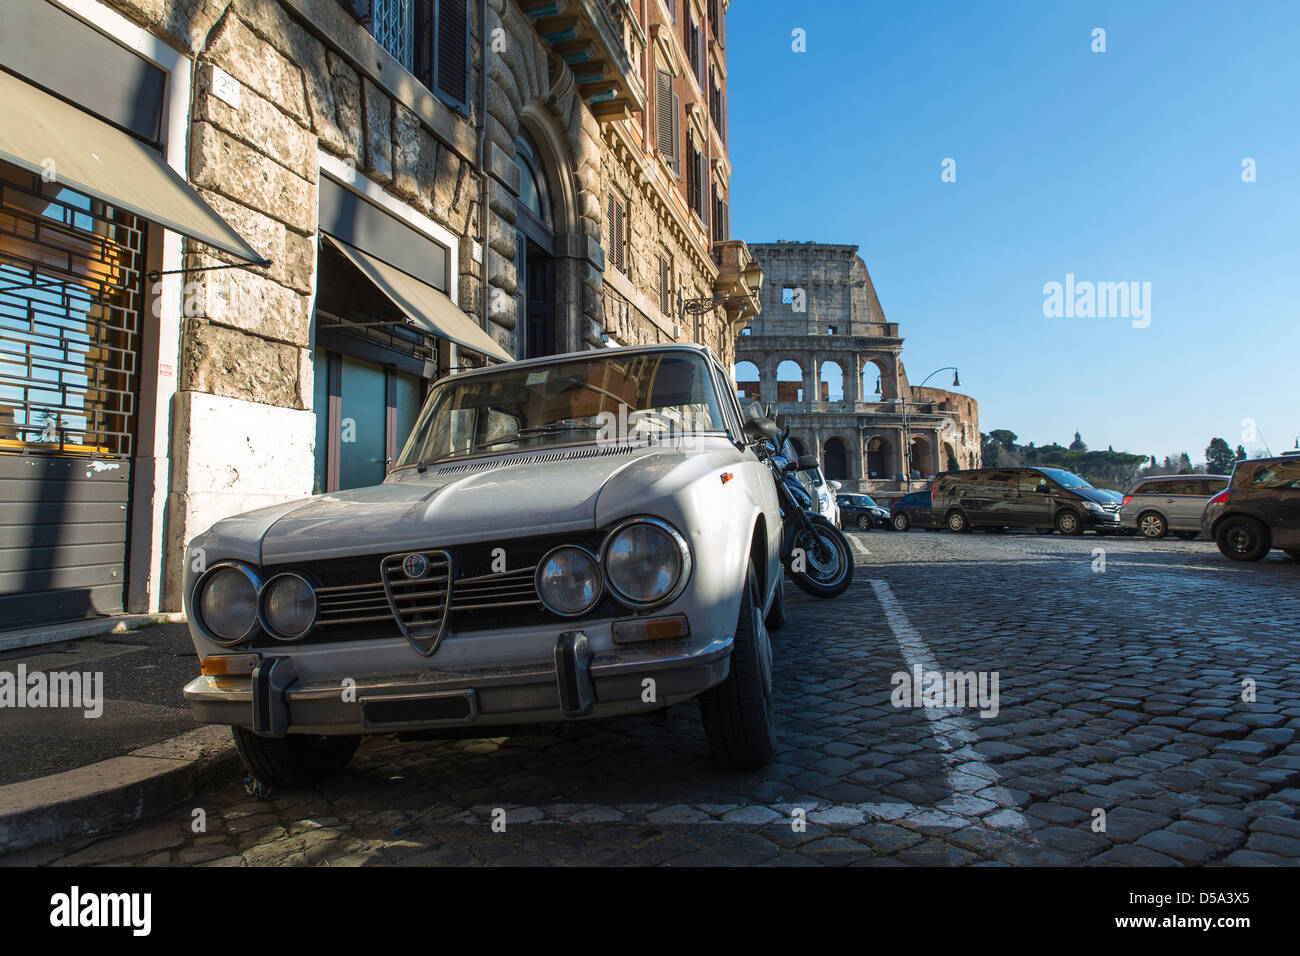 Old white Alfa Romeo car parked by the Roman Colosseum in Rome Italy Stock Photo